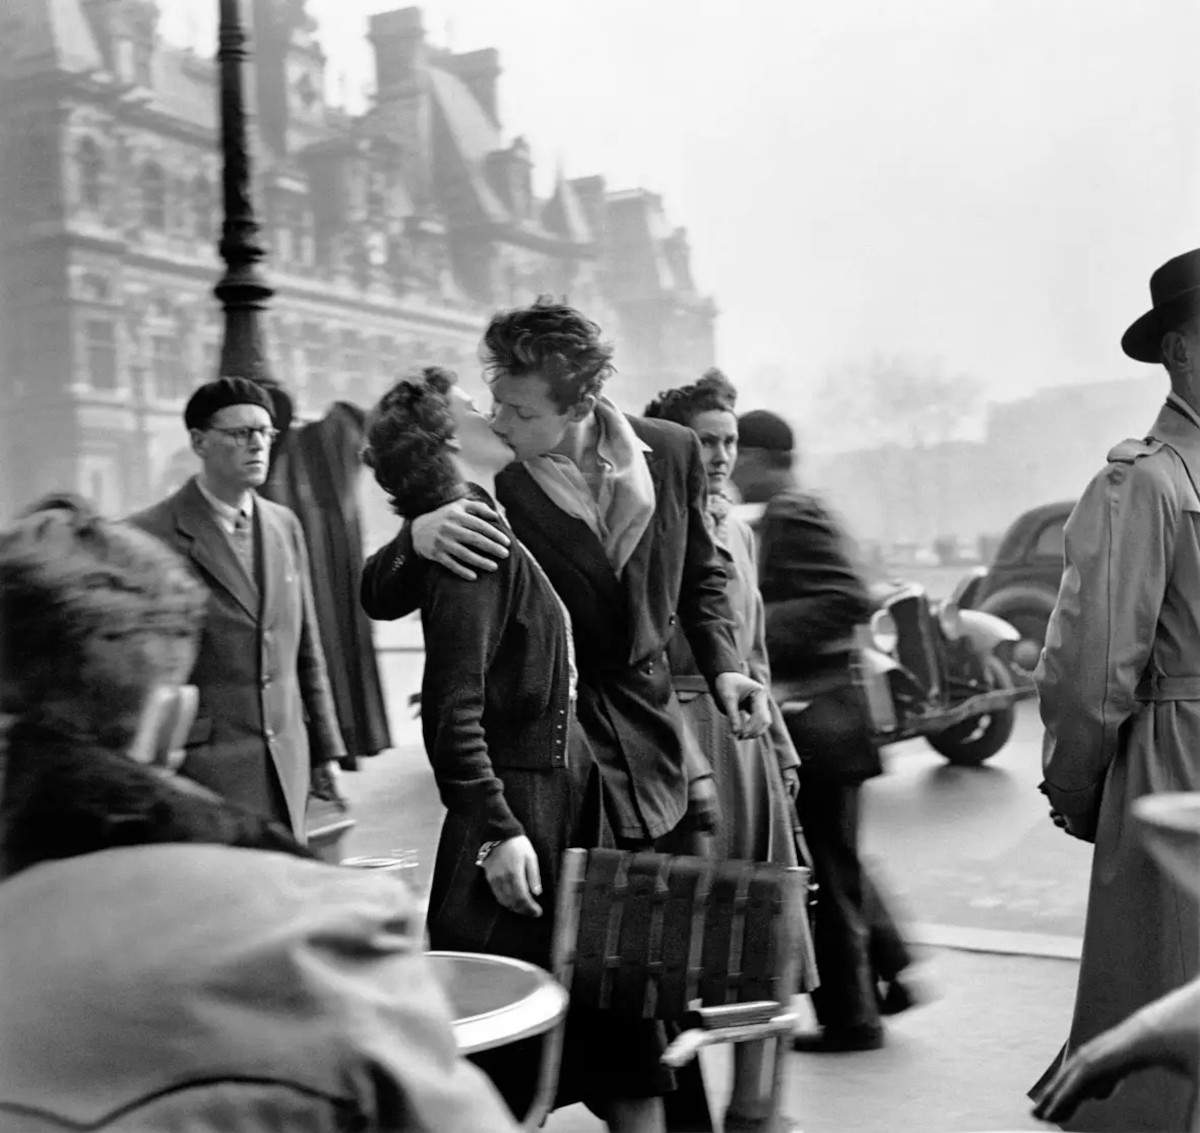 Disappeared at age 93 FranÃ§oise Bornet, the young woman in Doisneau's famous Kiss